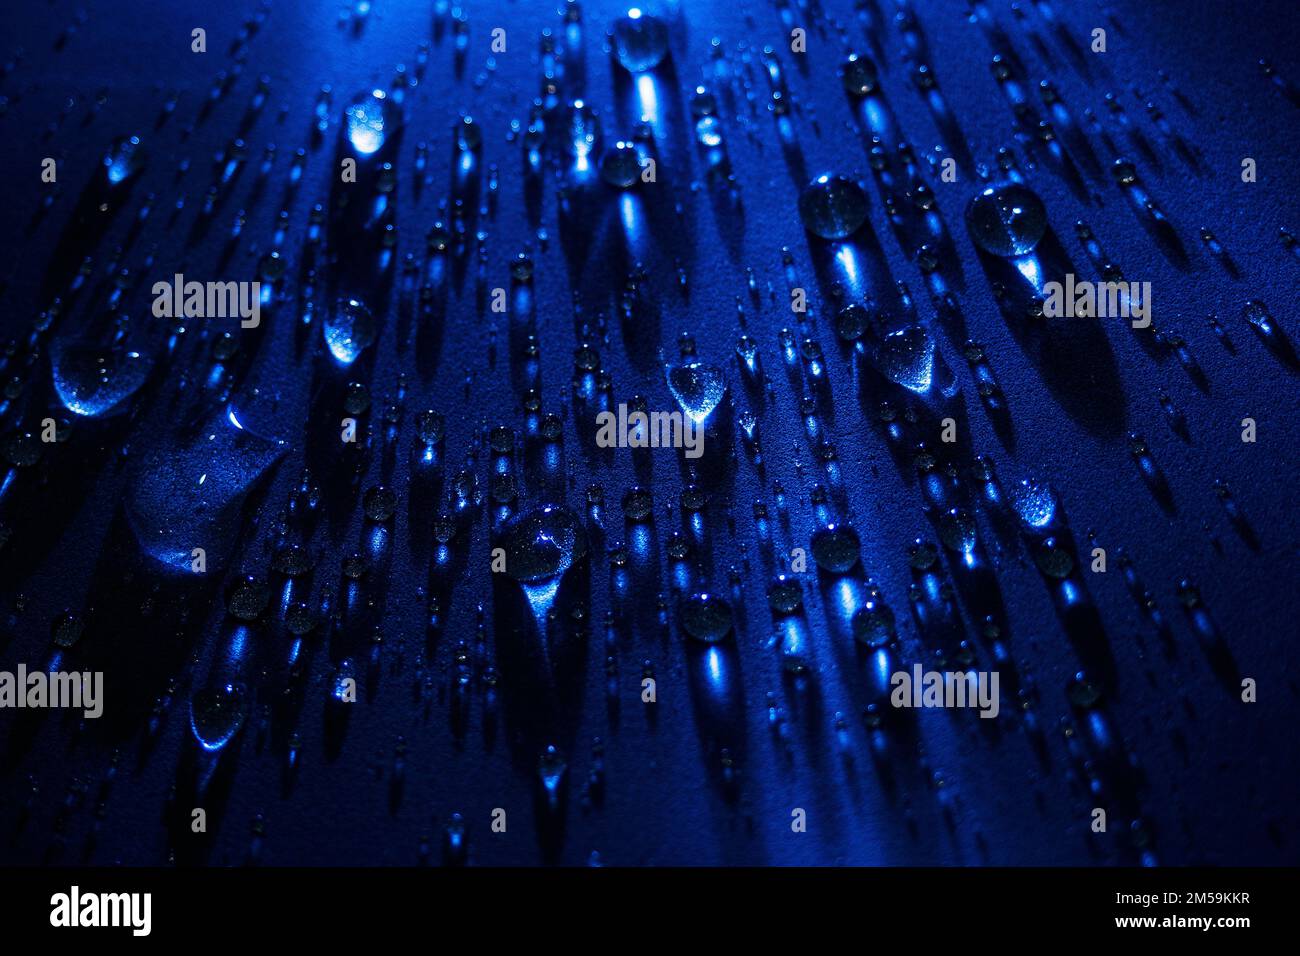 Round drops of water on dark blue background. Through transparent drops of water pass rays of light. View from top. Beautiful back for screensaver. Abstract background.. Stock Photo